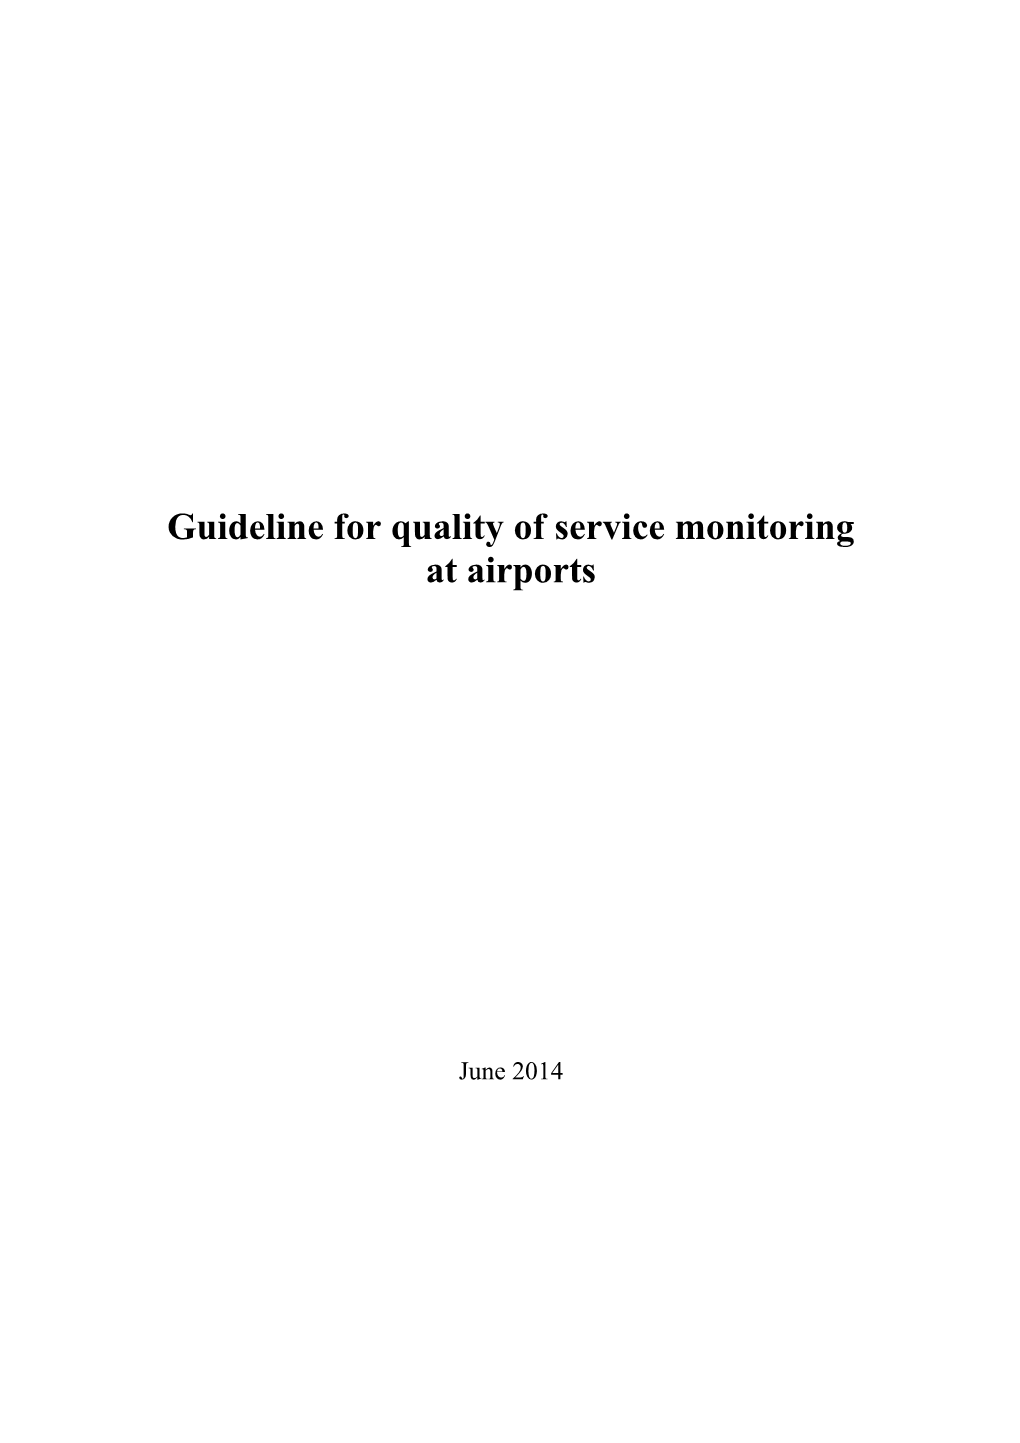 Guideline for Quality of Service Monitoring at Airports